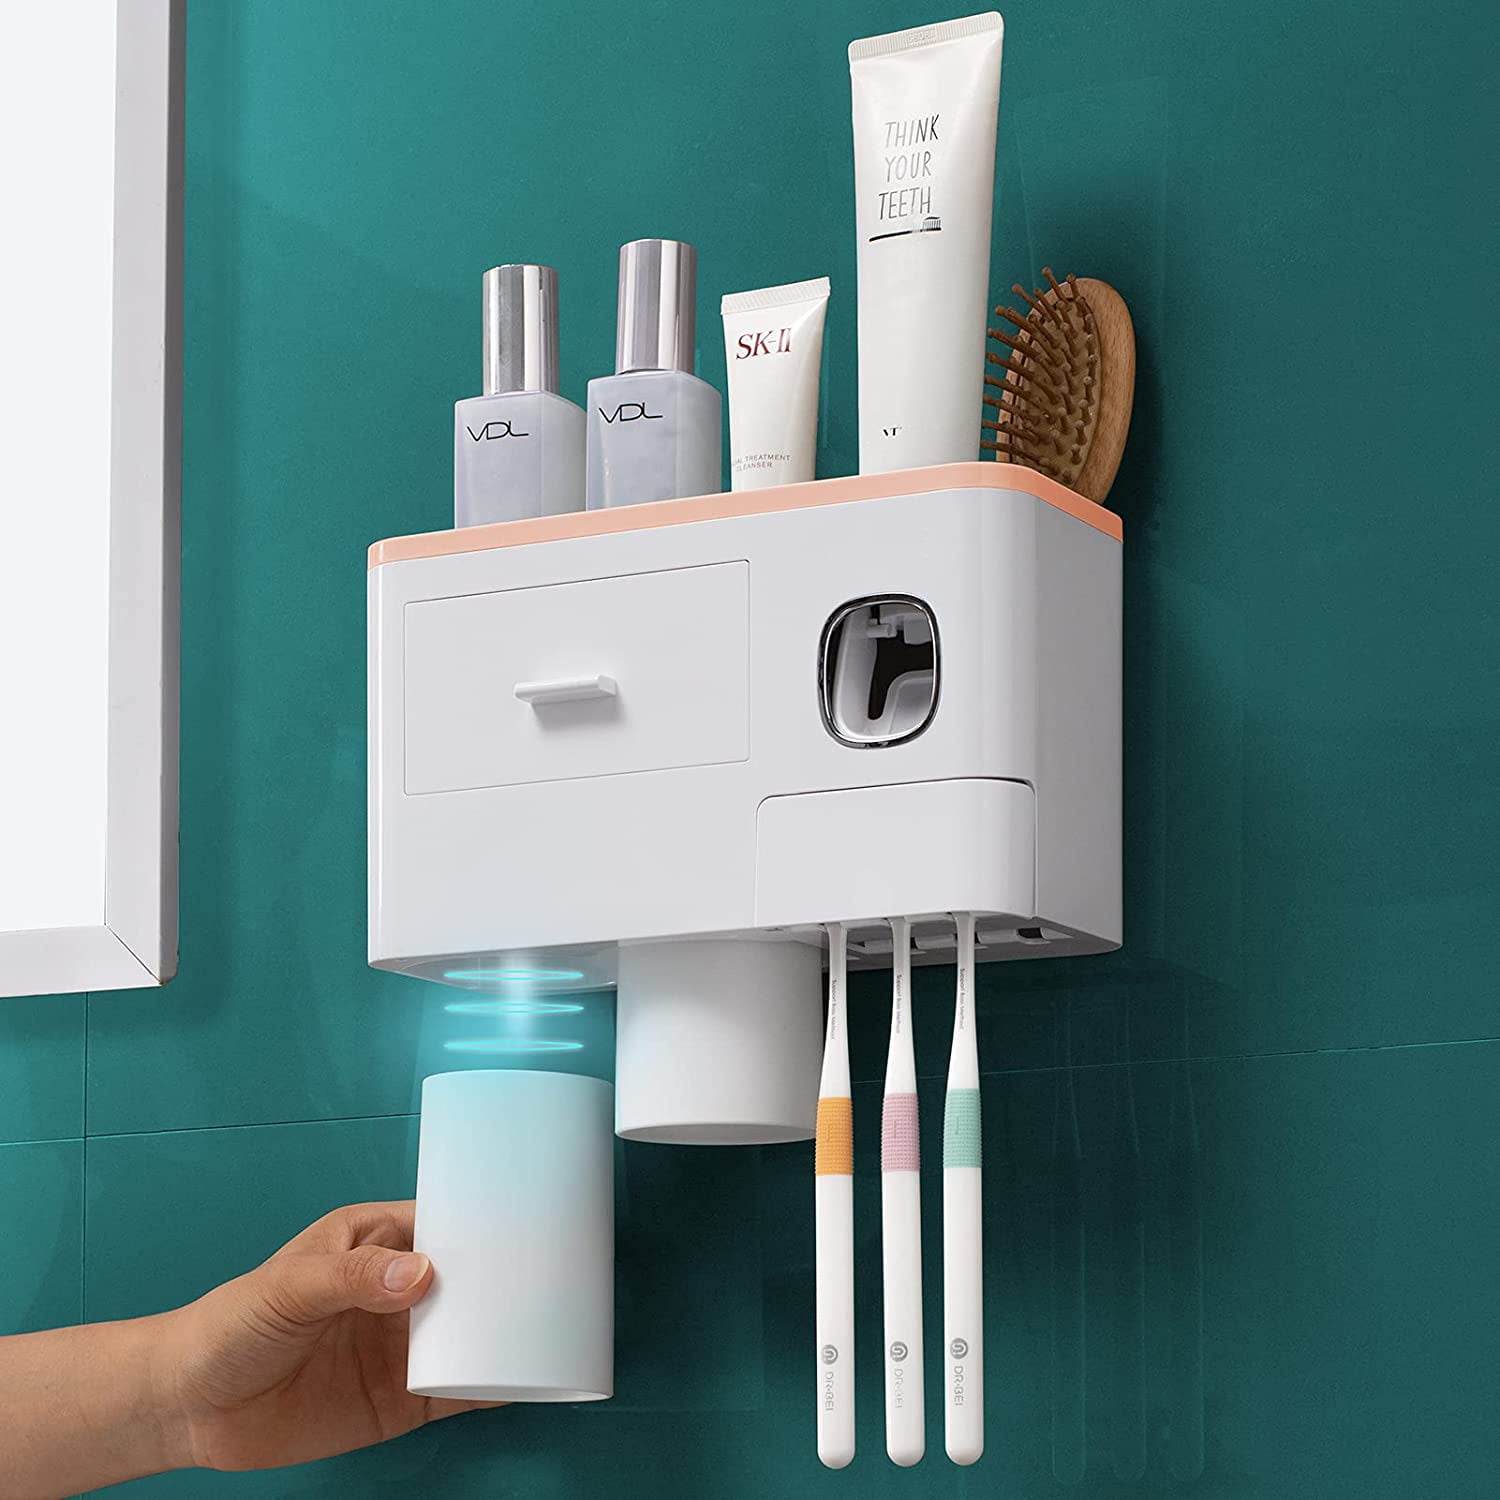 Toothbrush Holder Wall Mounted for Bathrooms,Toothbrush and Automatic  Toothpaste Dispenser Squeezer, with 2 Magnetic Cups, 4 Organizer Slots,  Drawer Storage Tray.. ($17.99) For AMAZ0N USA 🇺🇸 Testers DM me if  interested : r/ReviewClub